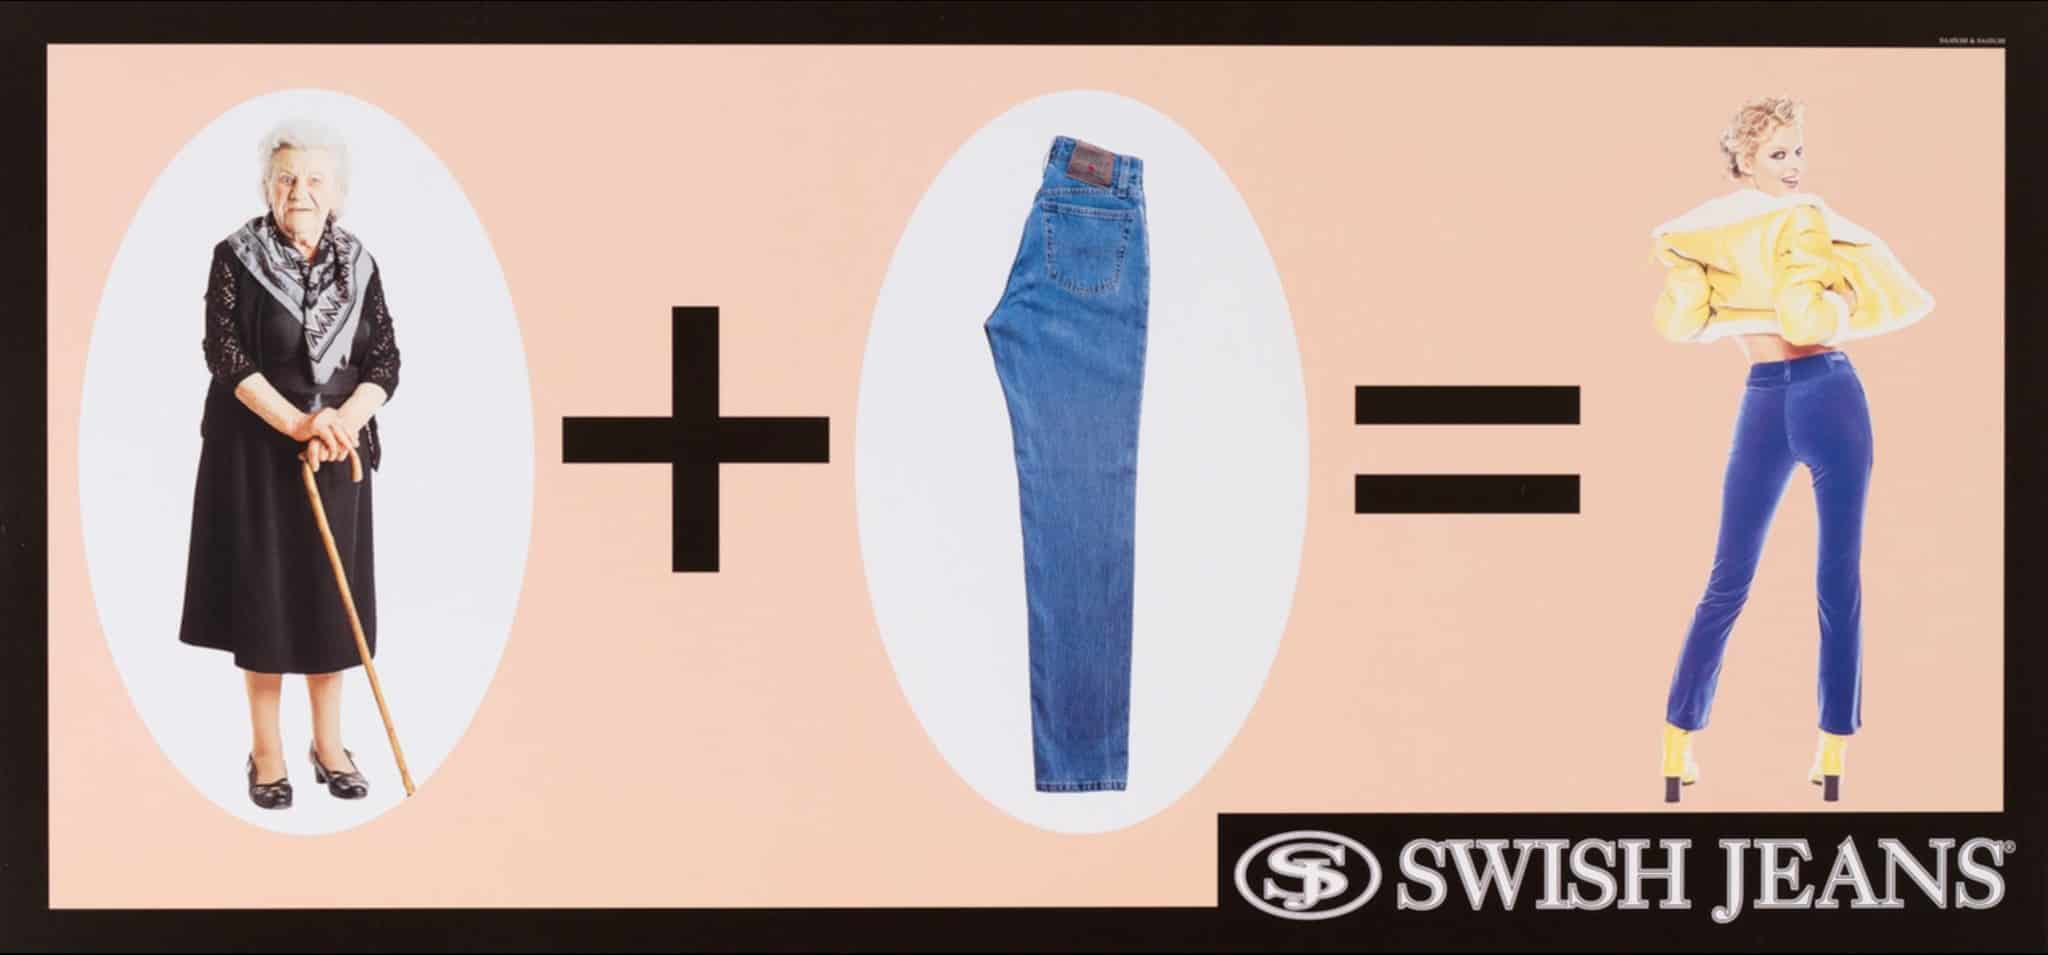 Luca Albanese (1996), Swish Jeans advertisement with Eva Herzigová visualses the first law of consumer behaviour.